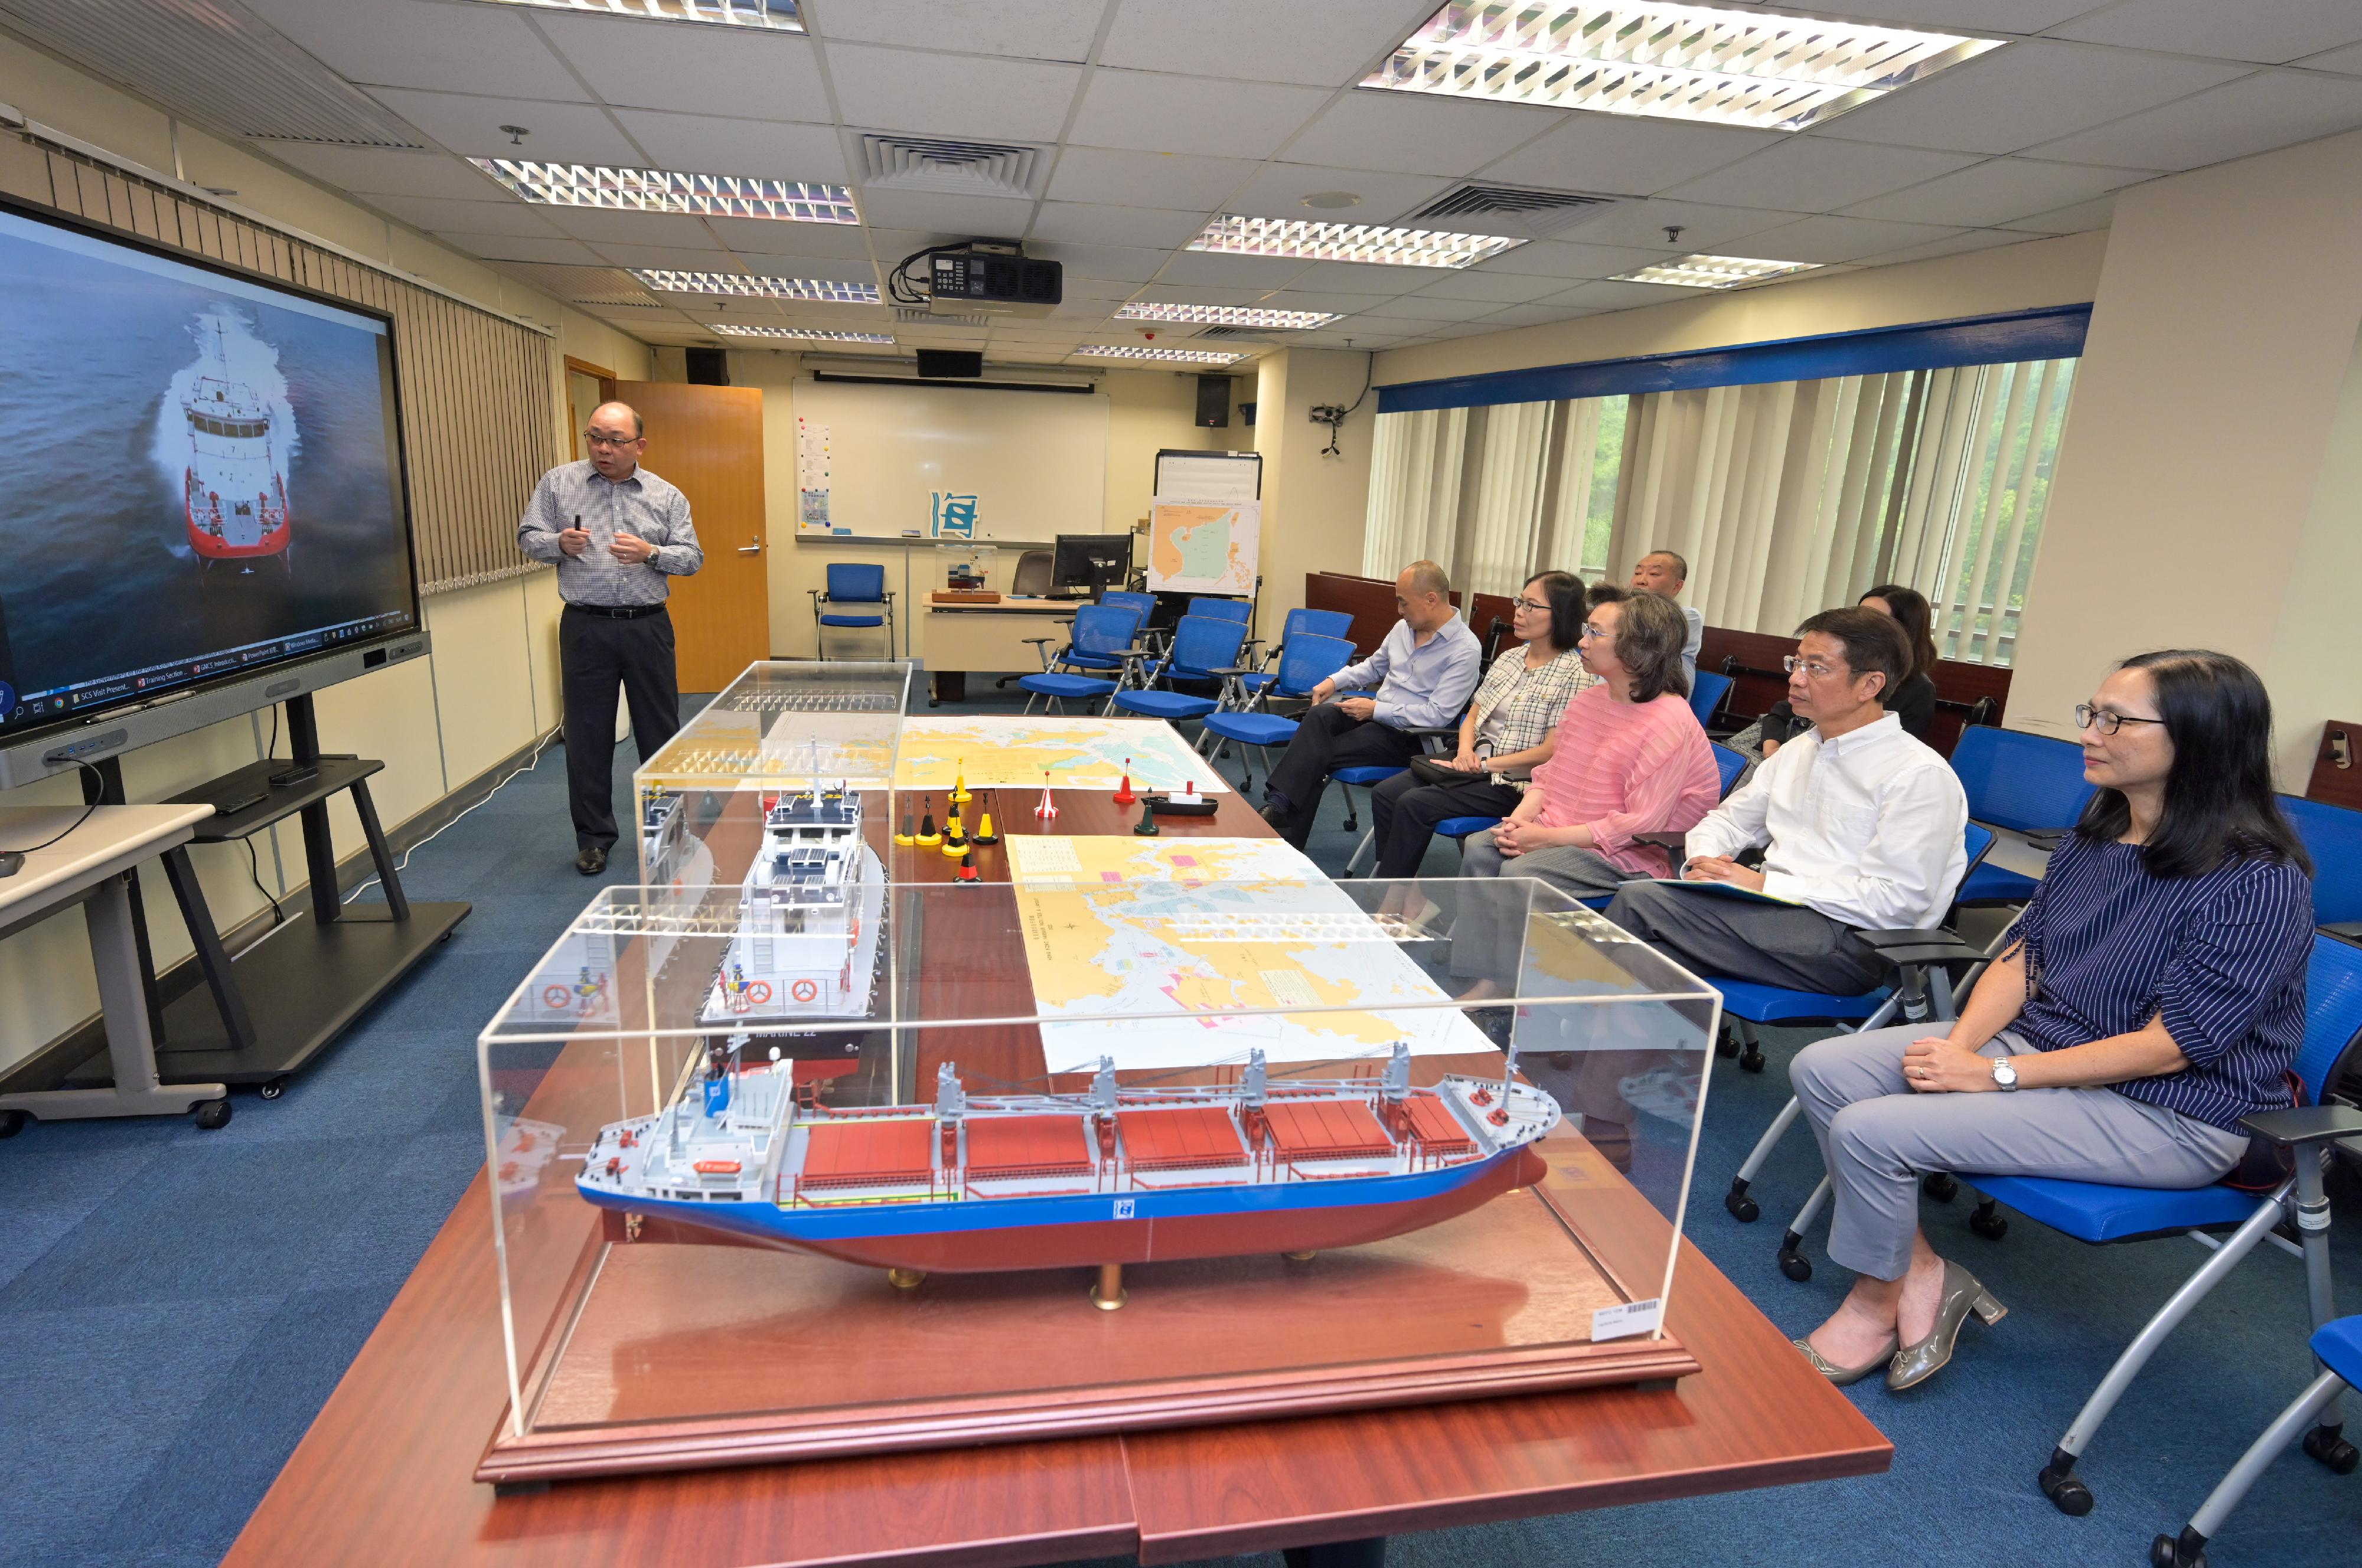 The Secretary for the Civil Service, Mrs Ingrid Yeung, visited the Marine Department today (August 24). Photo shows Mrs Yeung (third right) visiting the Marine Department Training Centre and being briefed by a duty officer on the marine training provided to the department's staff. Looking on are the Permanent Secretary for the Civil Service, Mr Clement Leung (second right), and the Director of Marine, Ms Carol Yuen (fourth right).